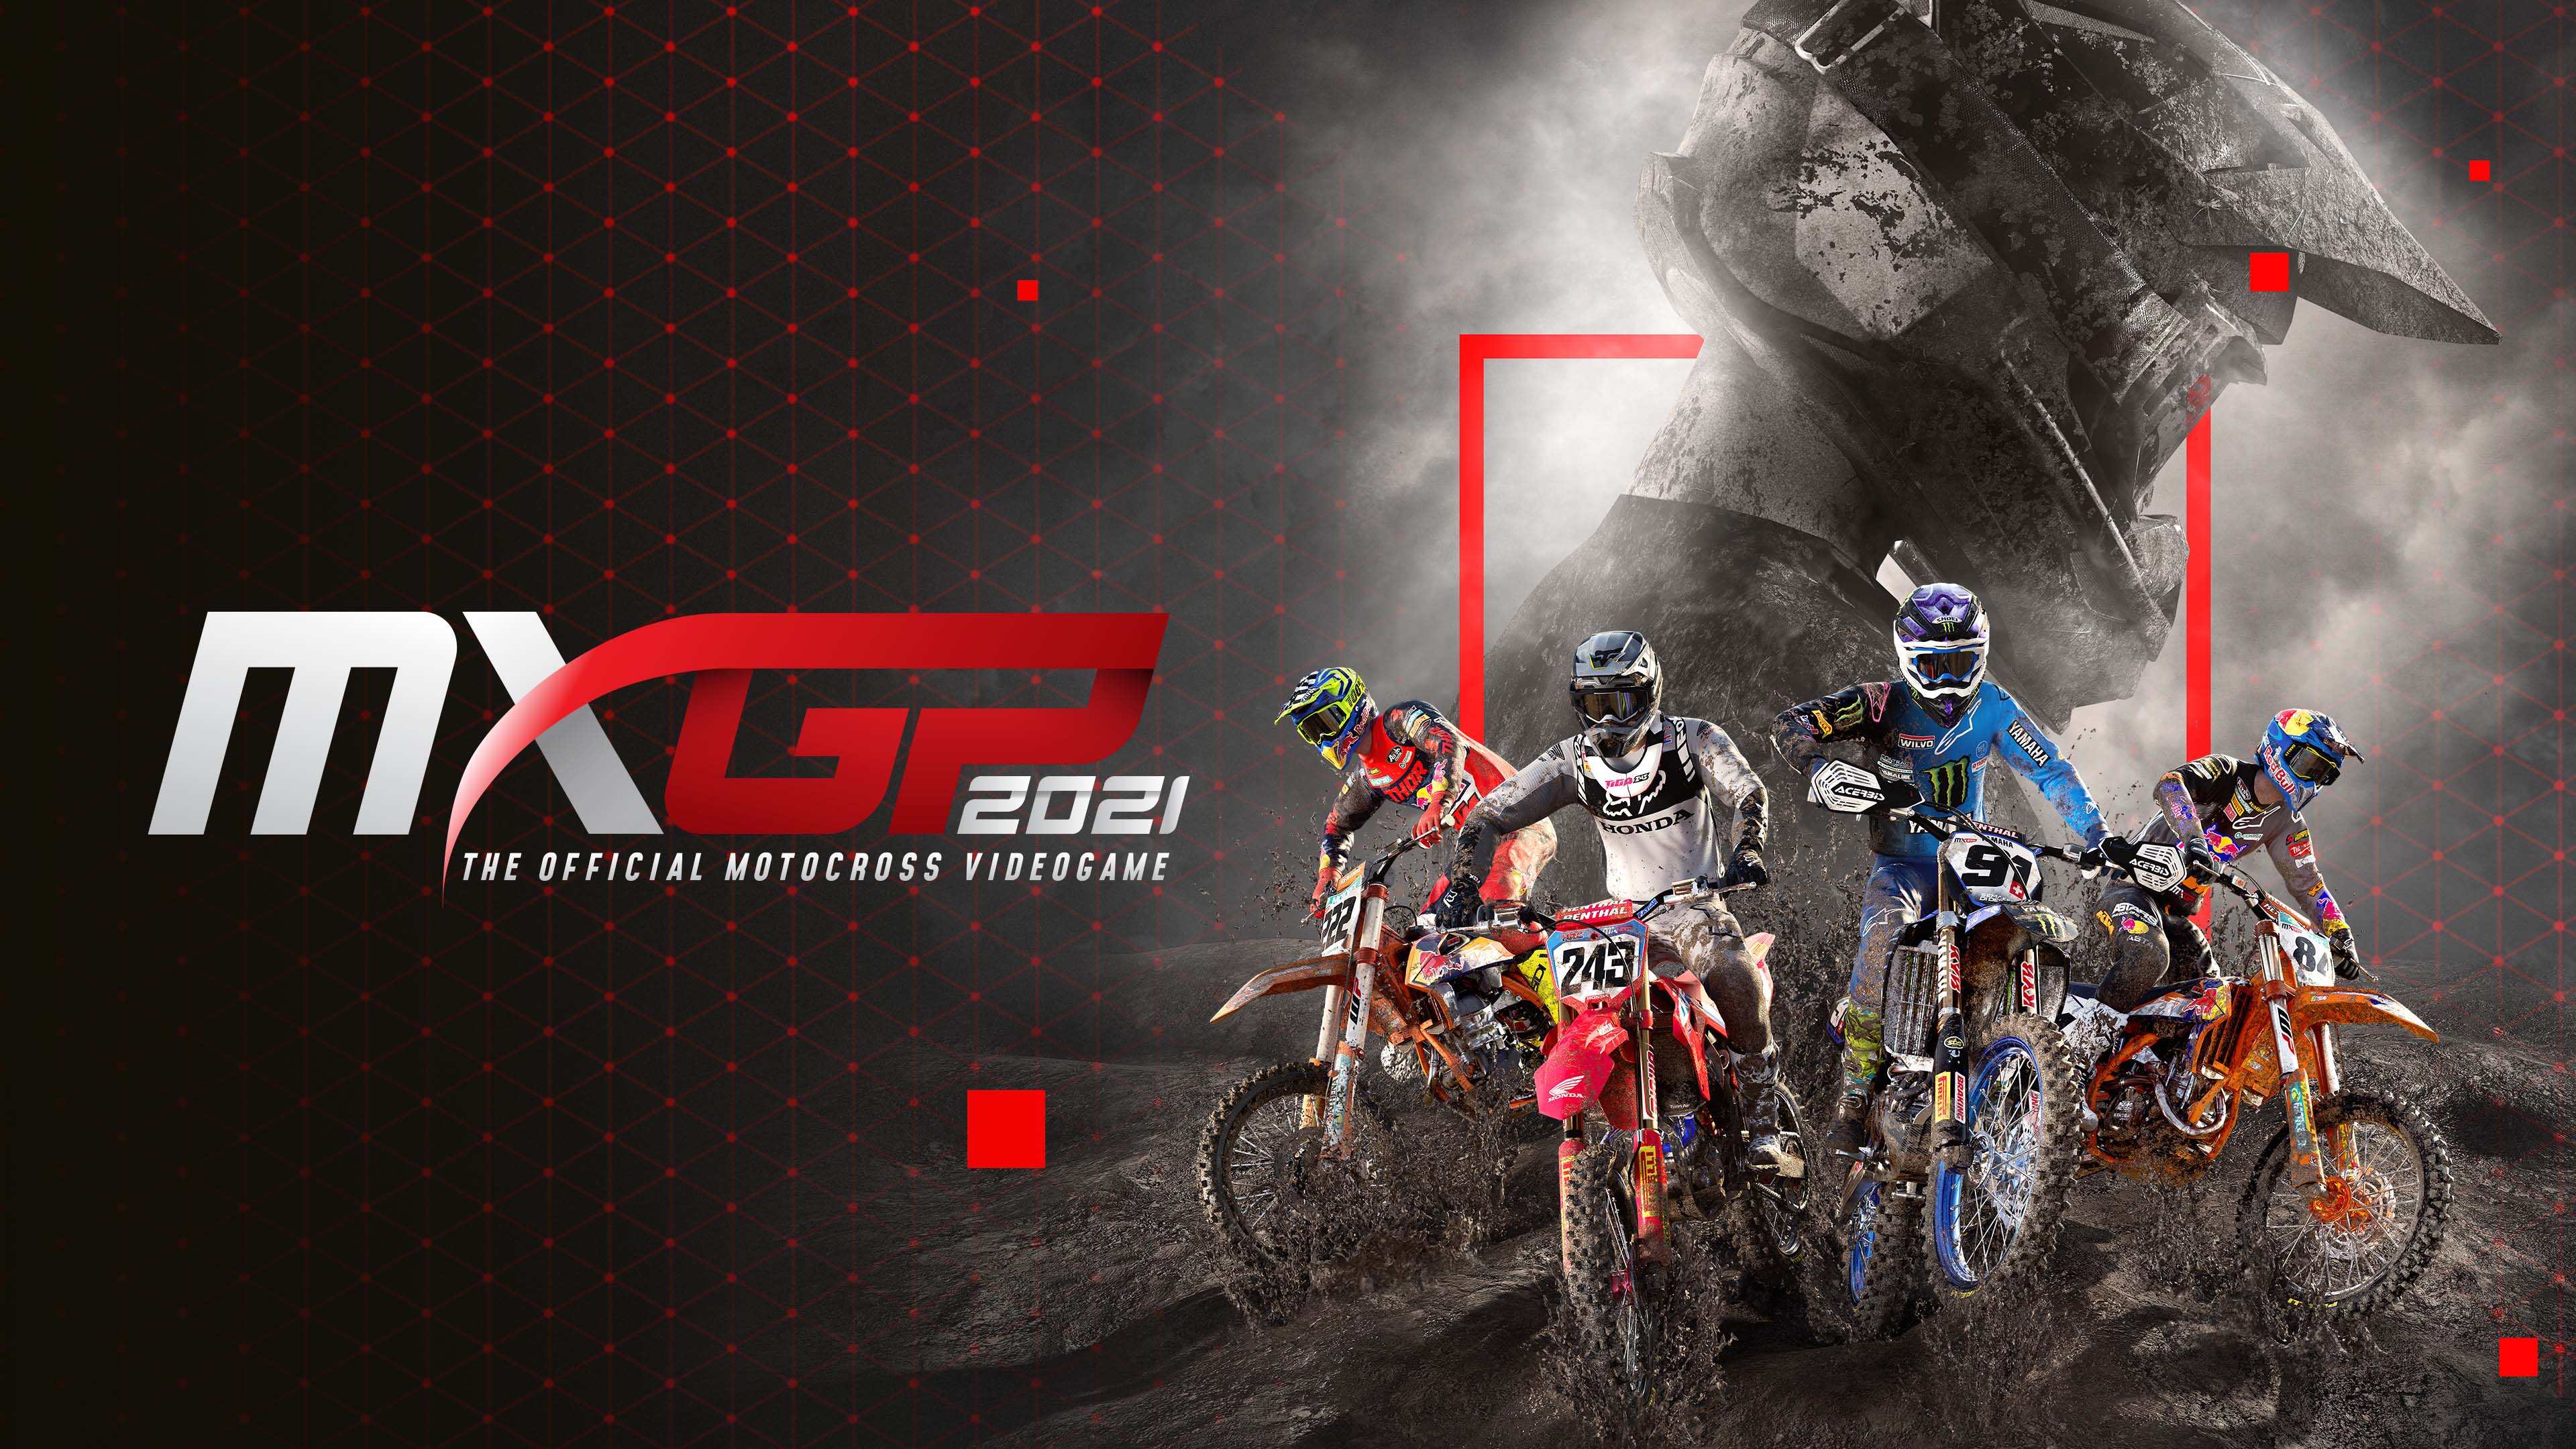 MXGP 2021 - The Official Motocross Videogame (英文)